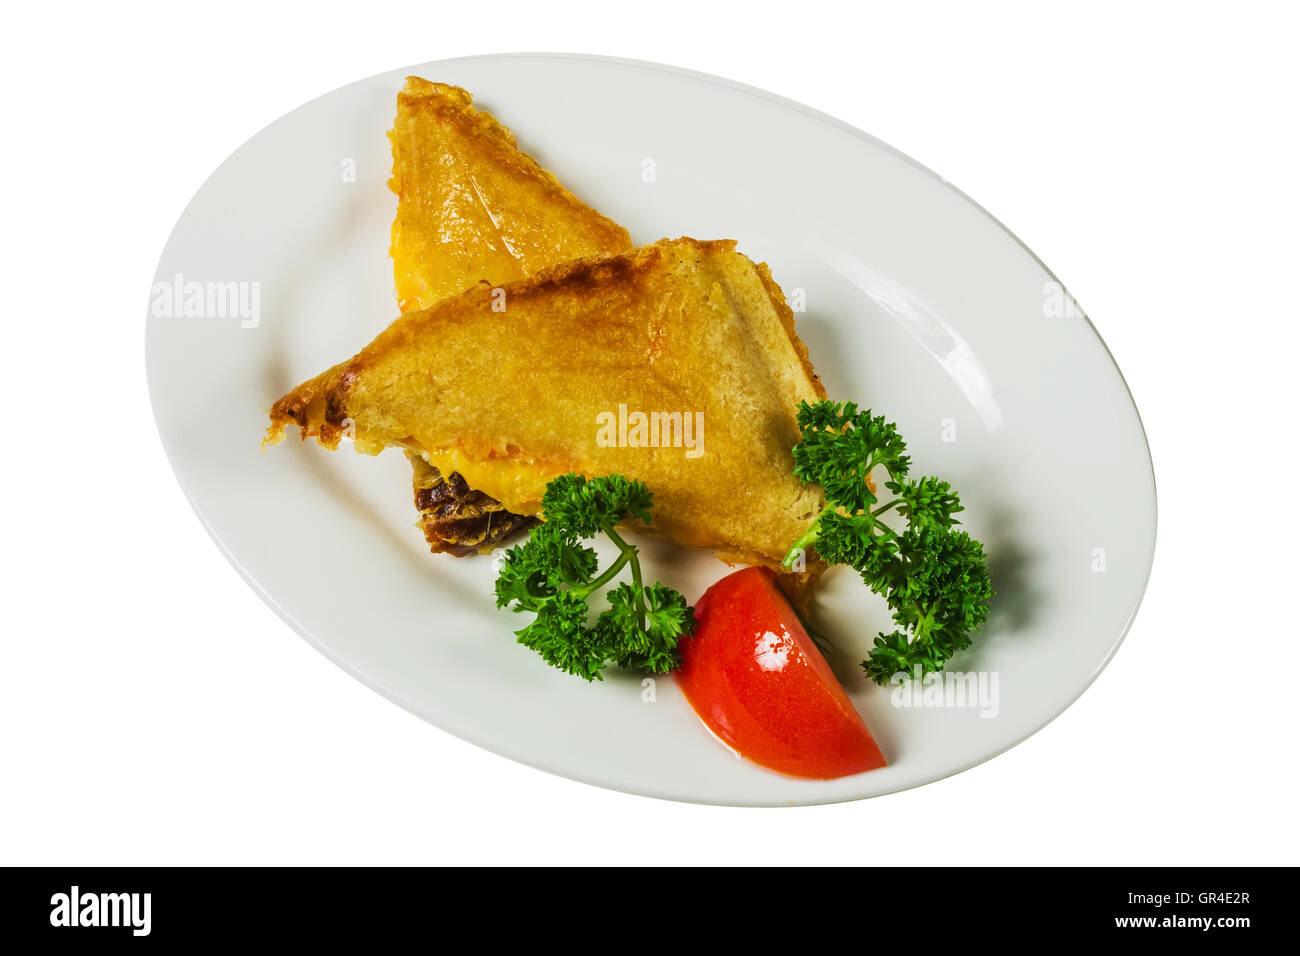 Sandwiches on a plate with tomato and herbs Stock Photo